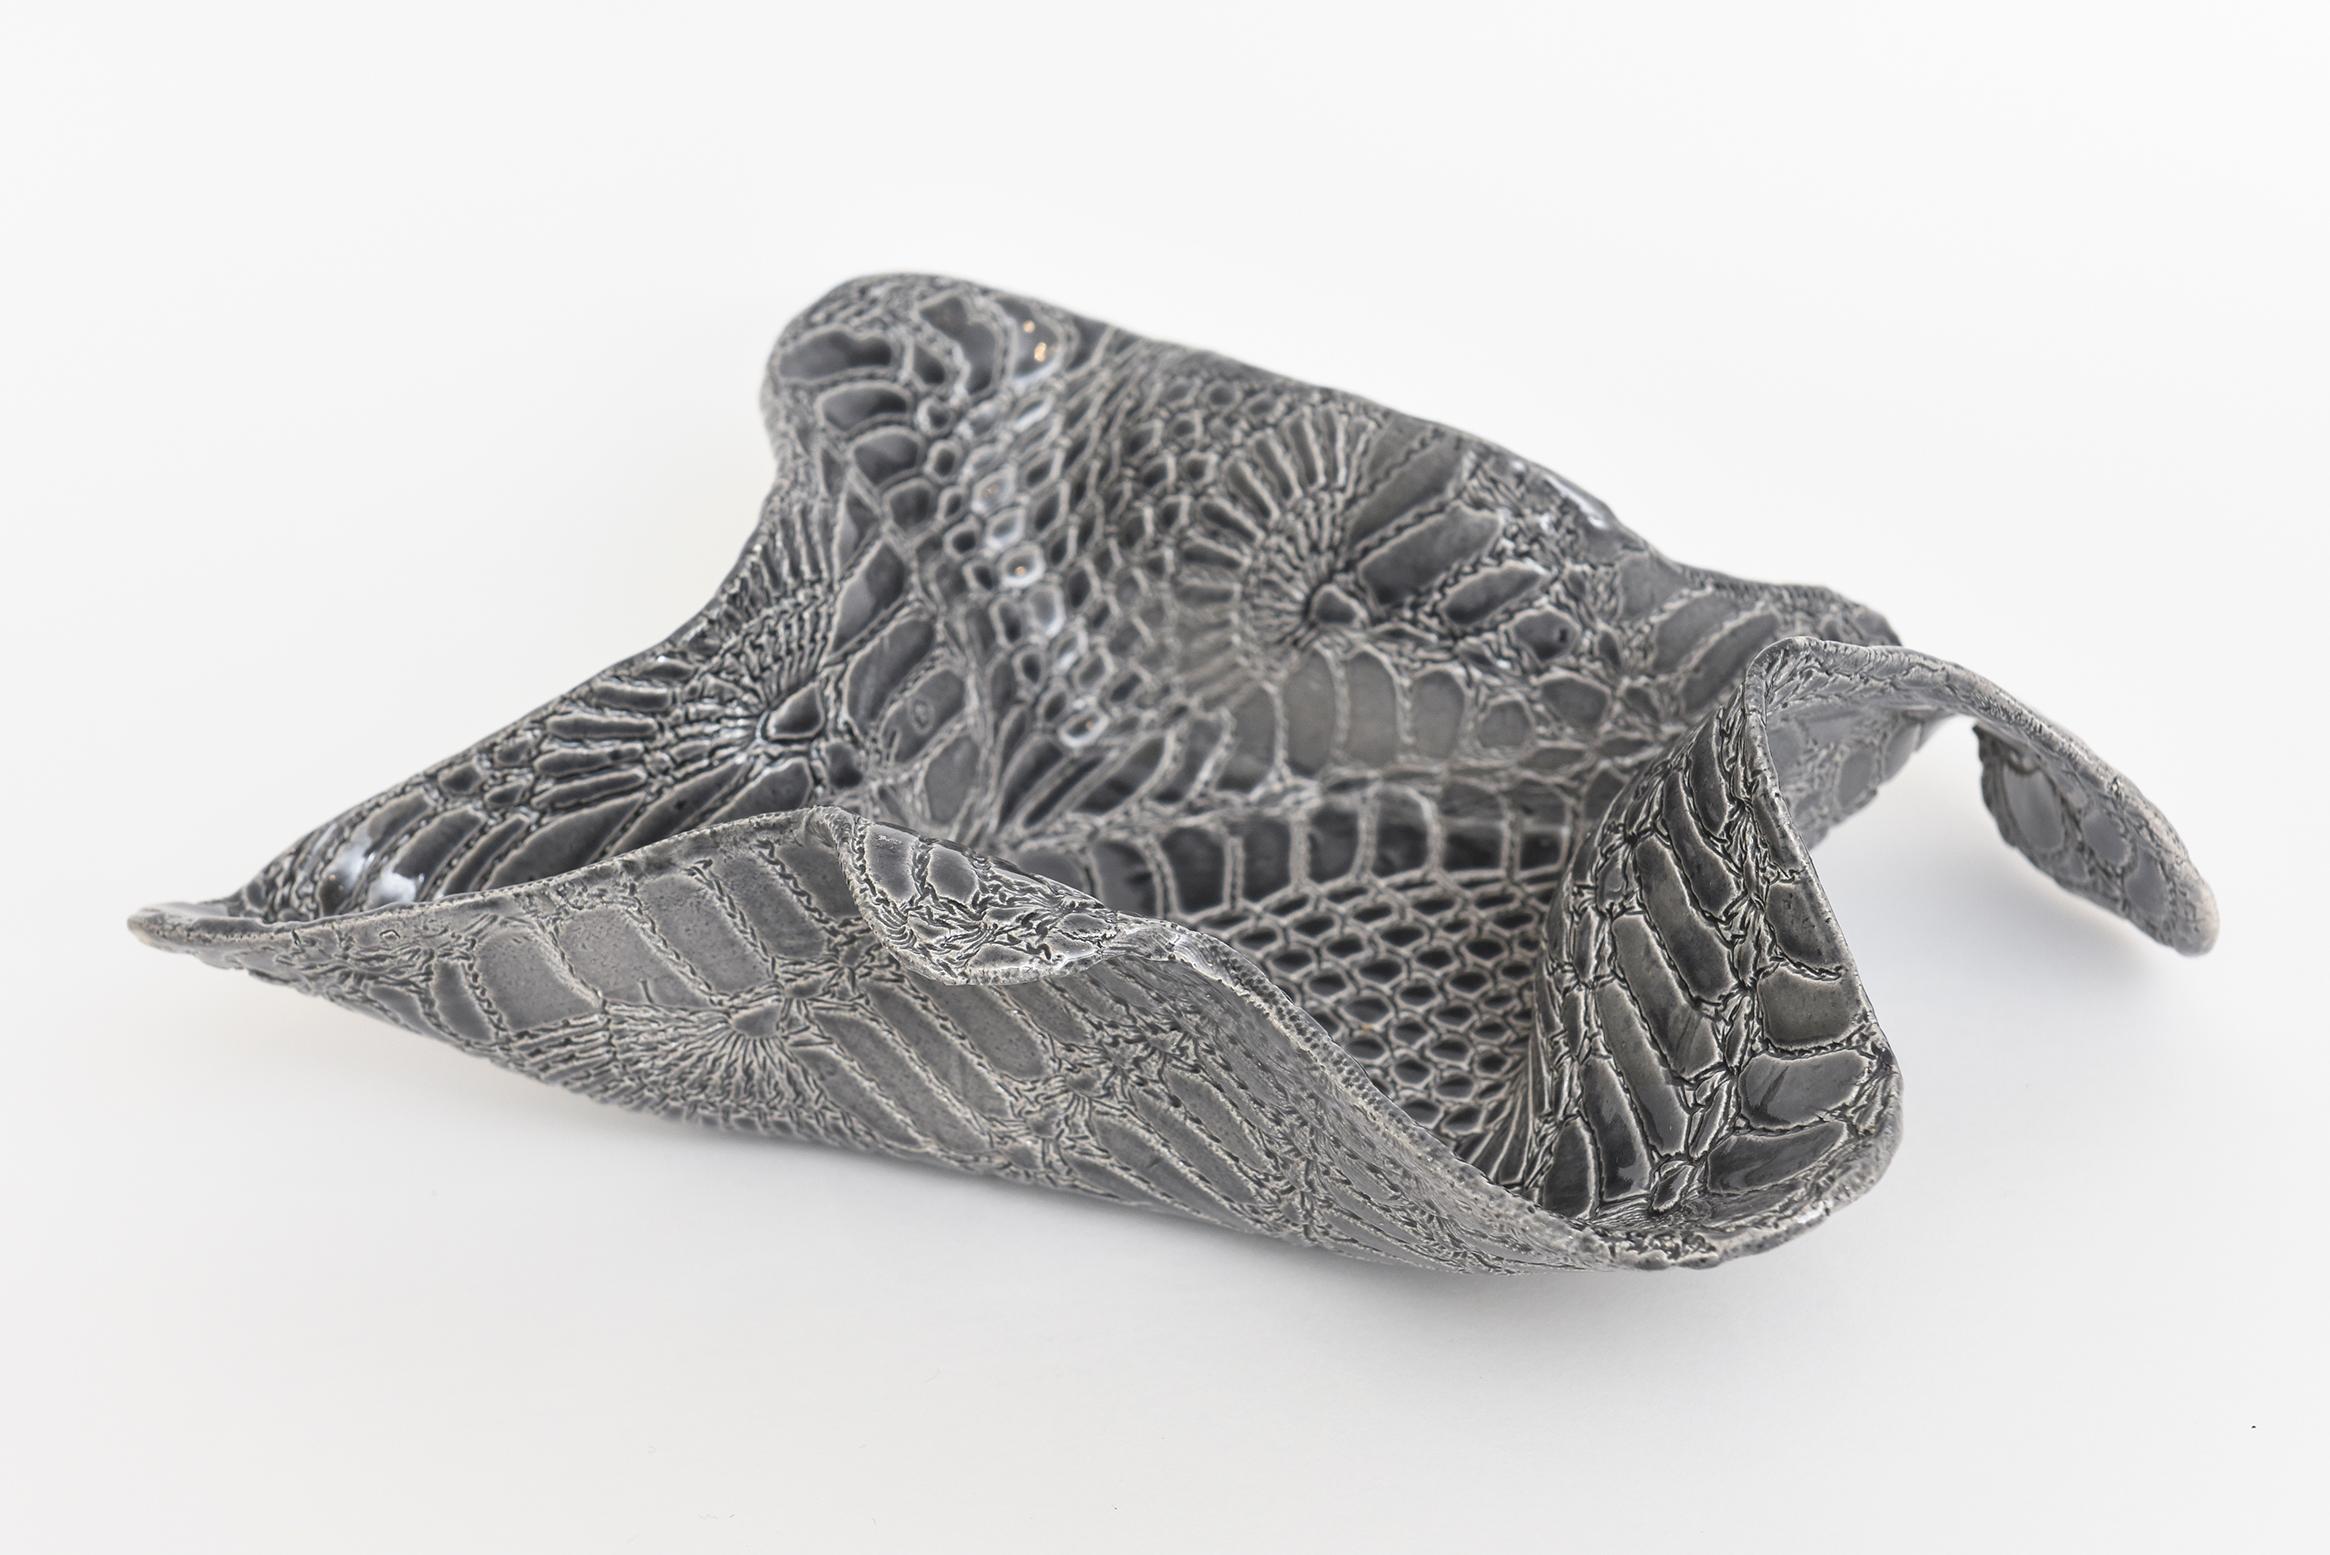 Ceramic Textural Snakeskin Pattern Grey White Biomorphic Sculptural Bowl In Good Condition For Sale In North Miami, FL